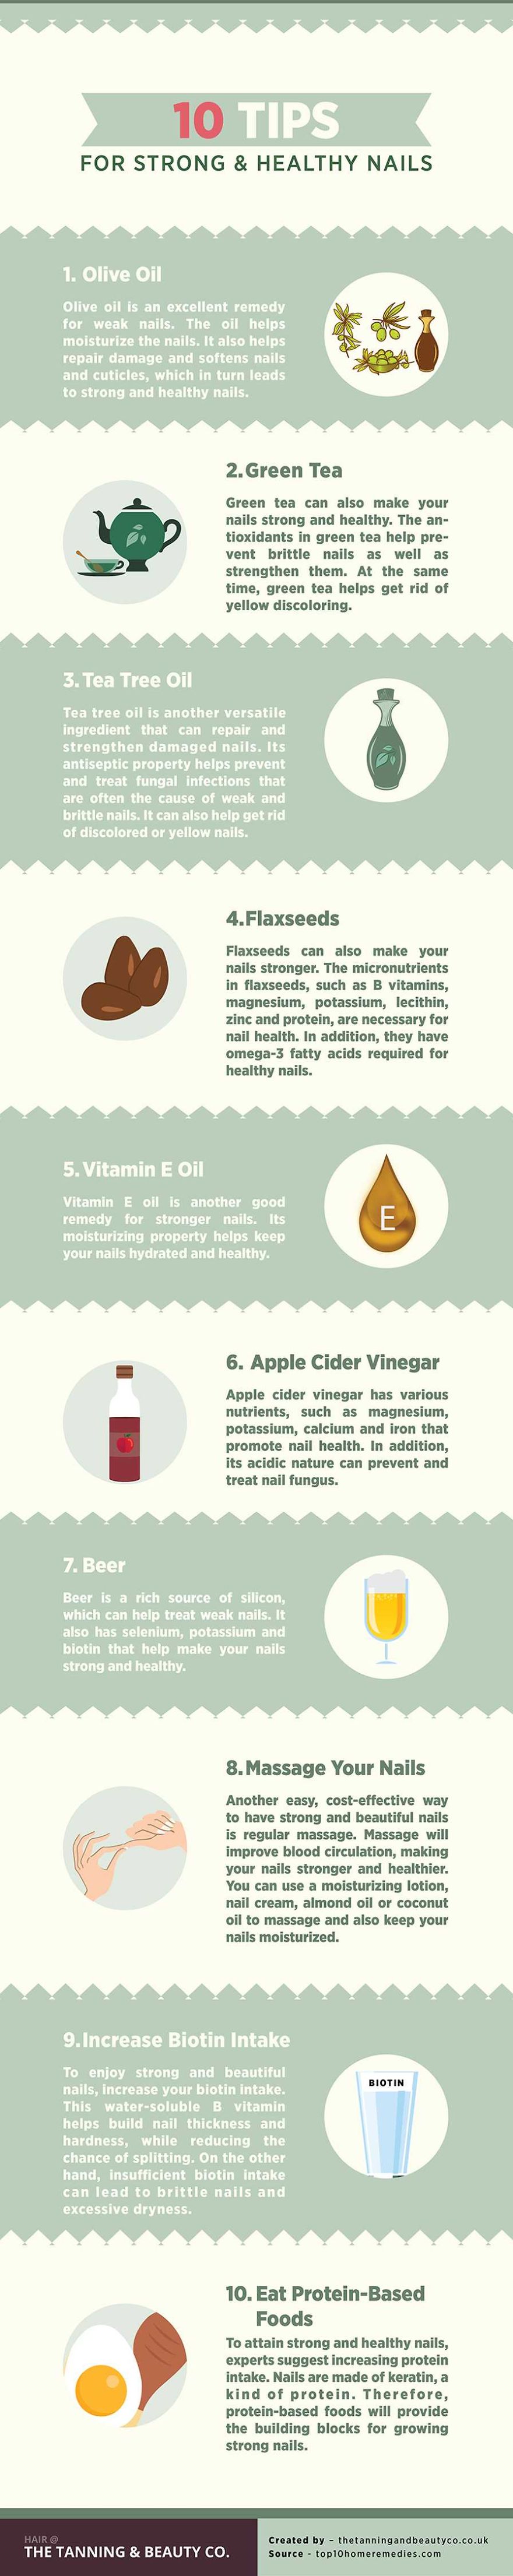 10 Tips For Strong And Healthy Nails (infographic)